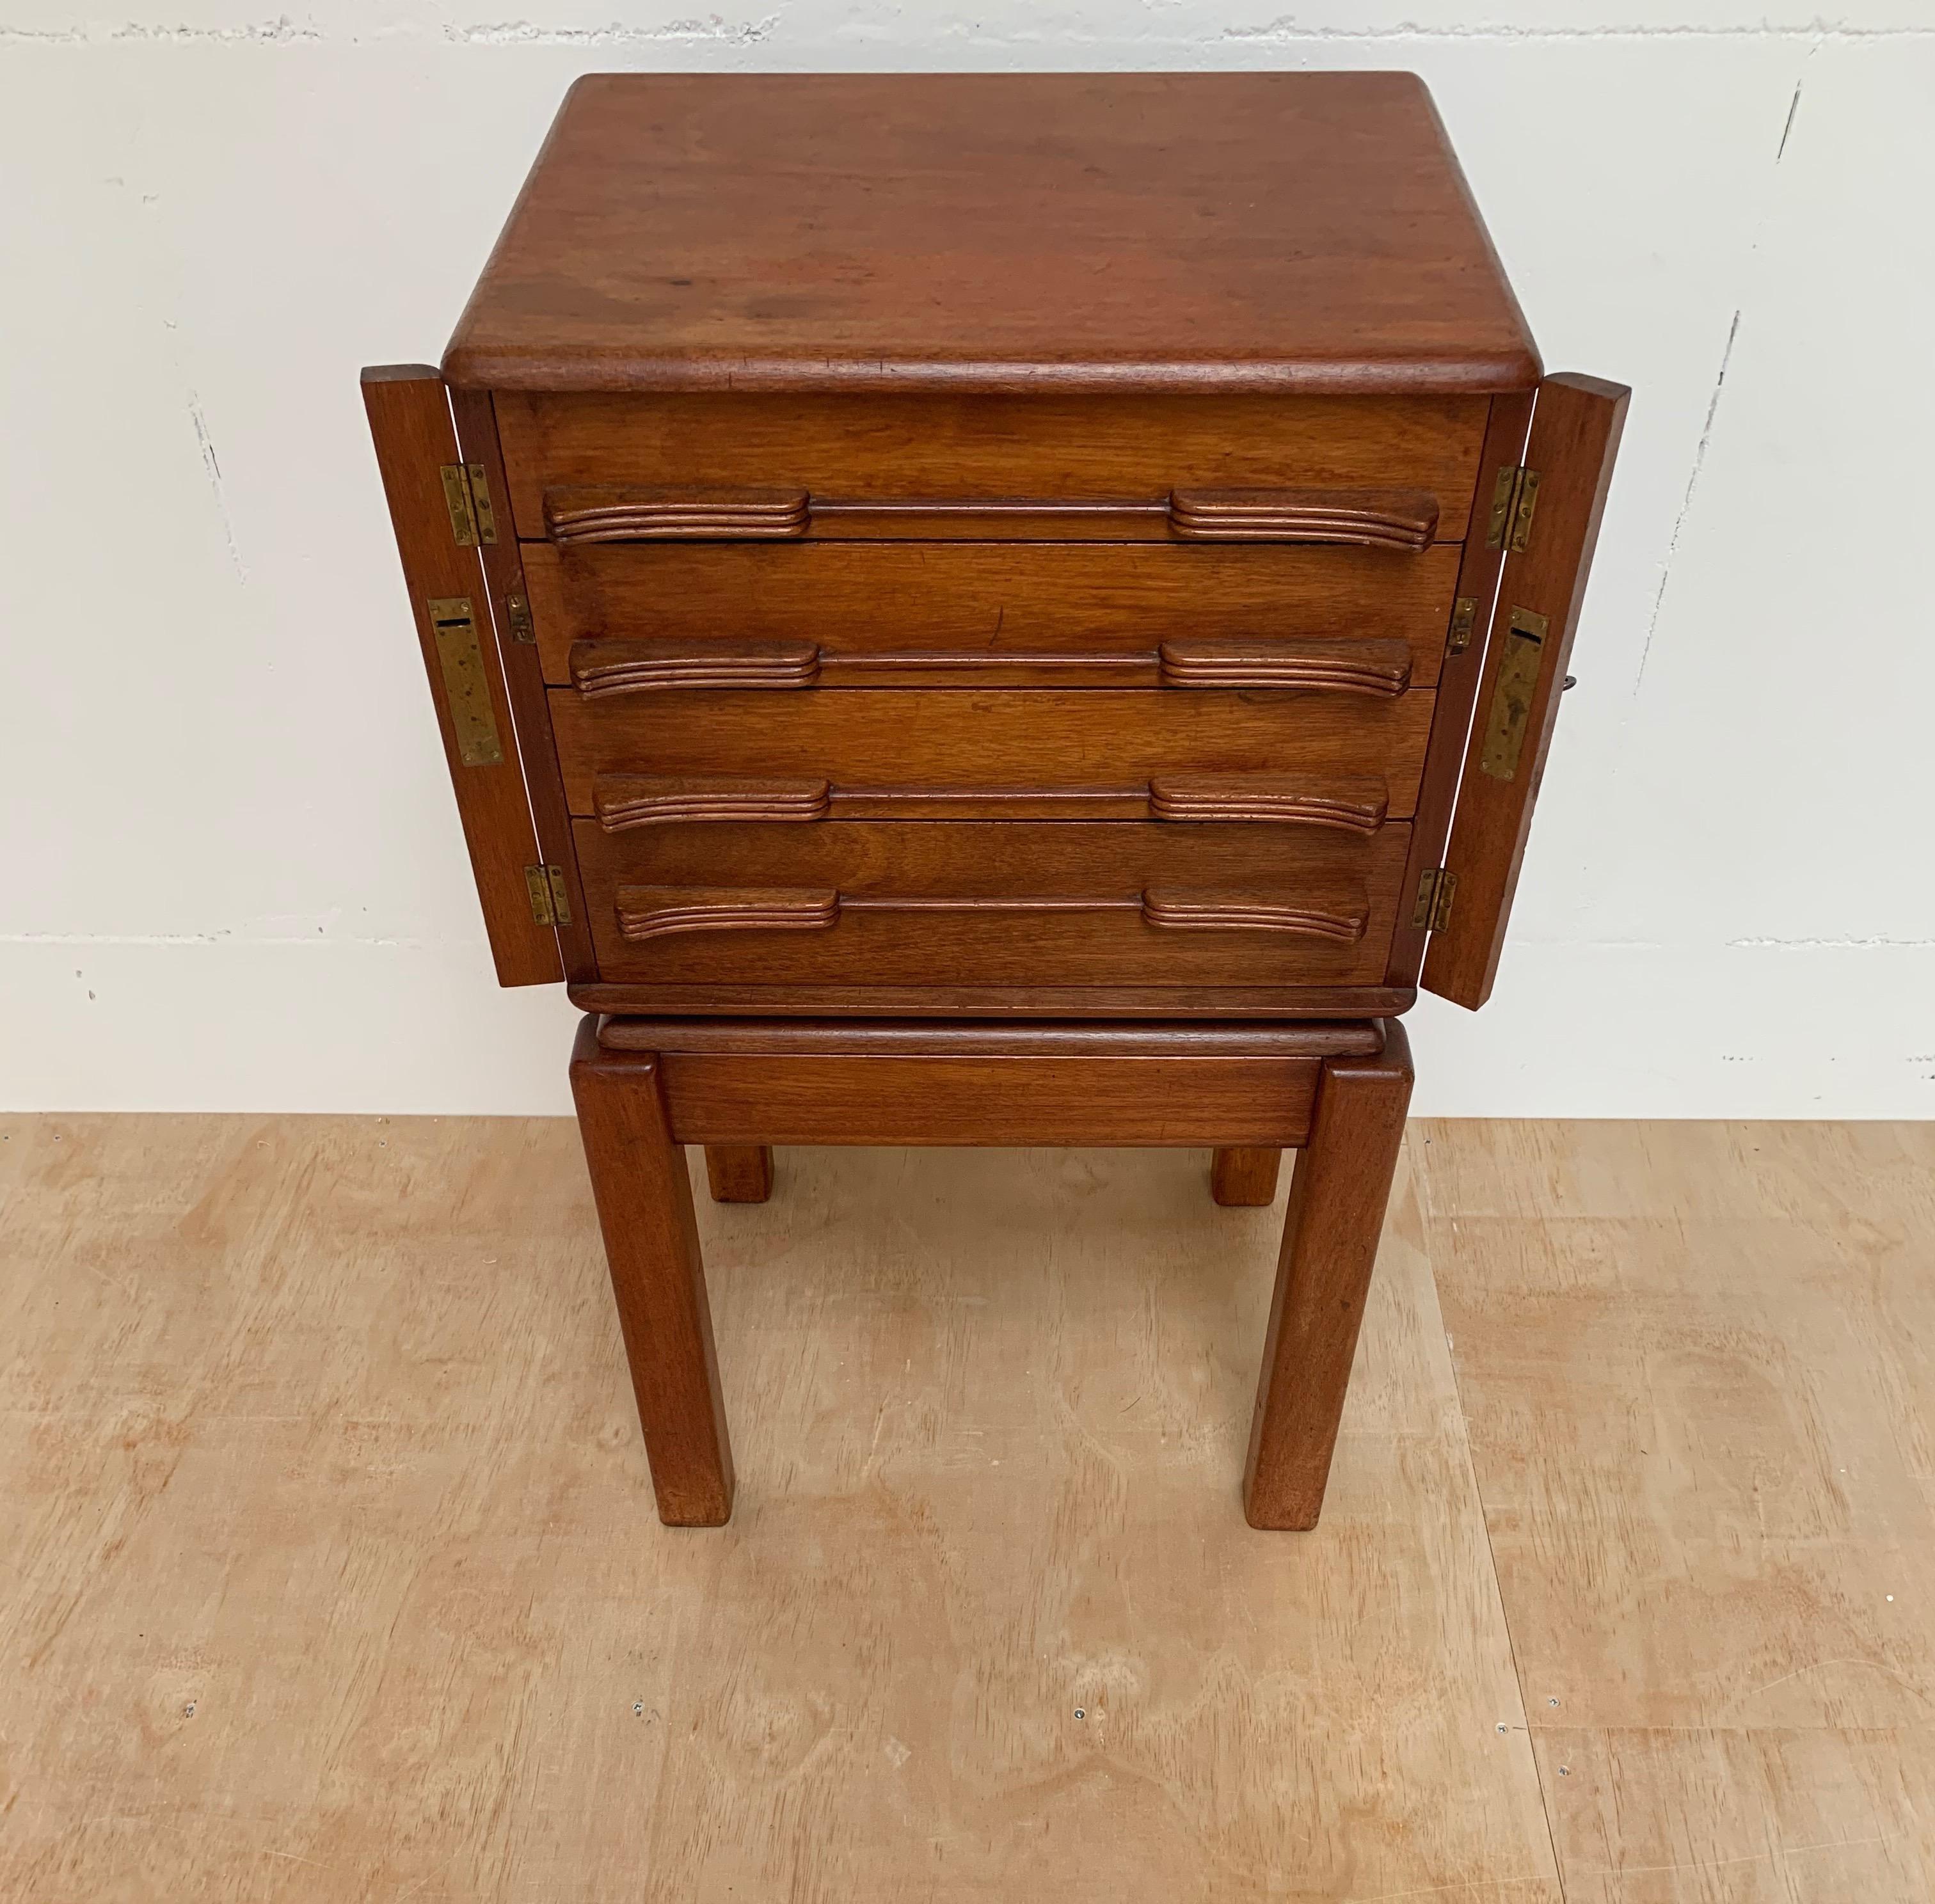 20th Century Striking Mid-Century Modern Documents Cabinet / Wellington Chest of Drawers